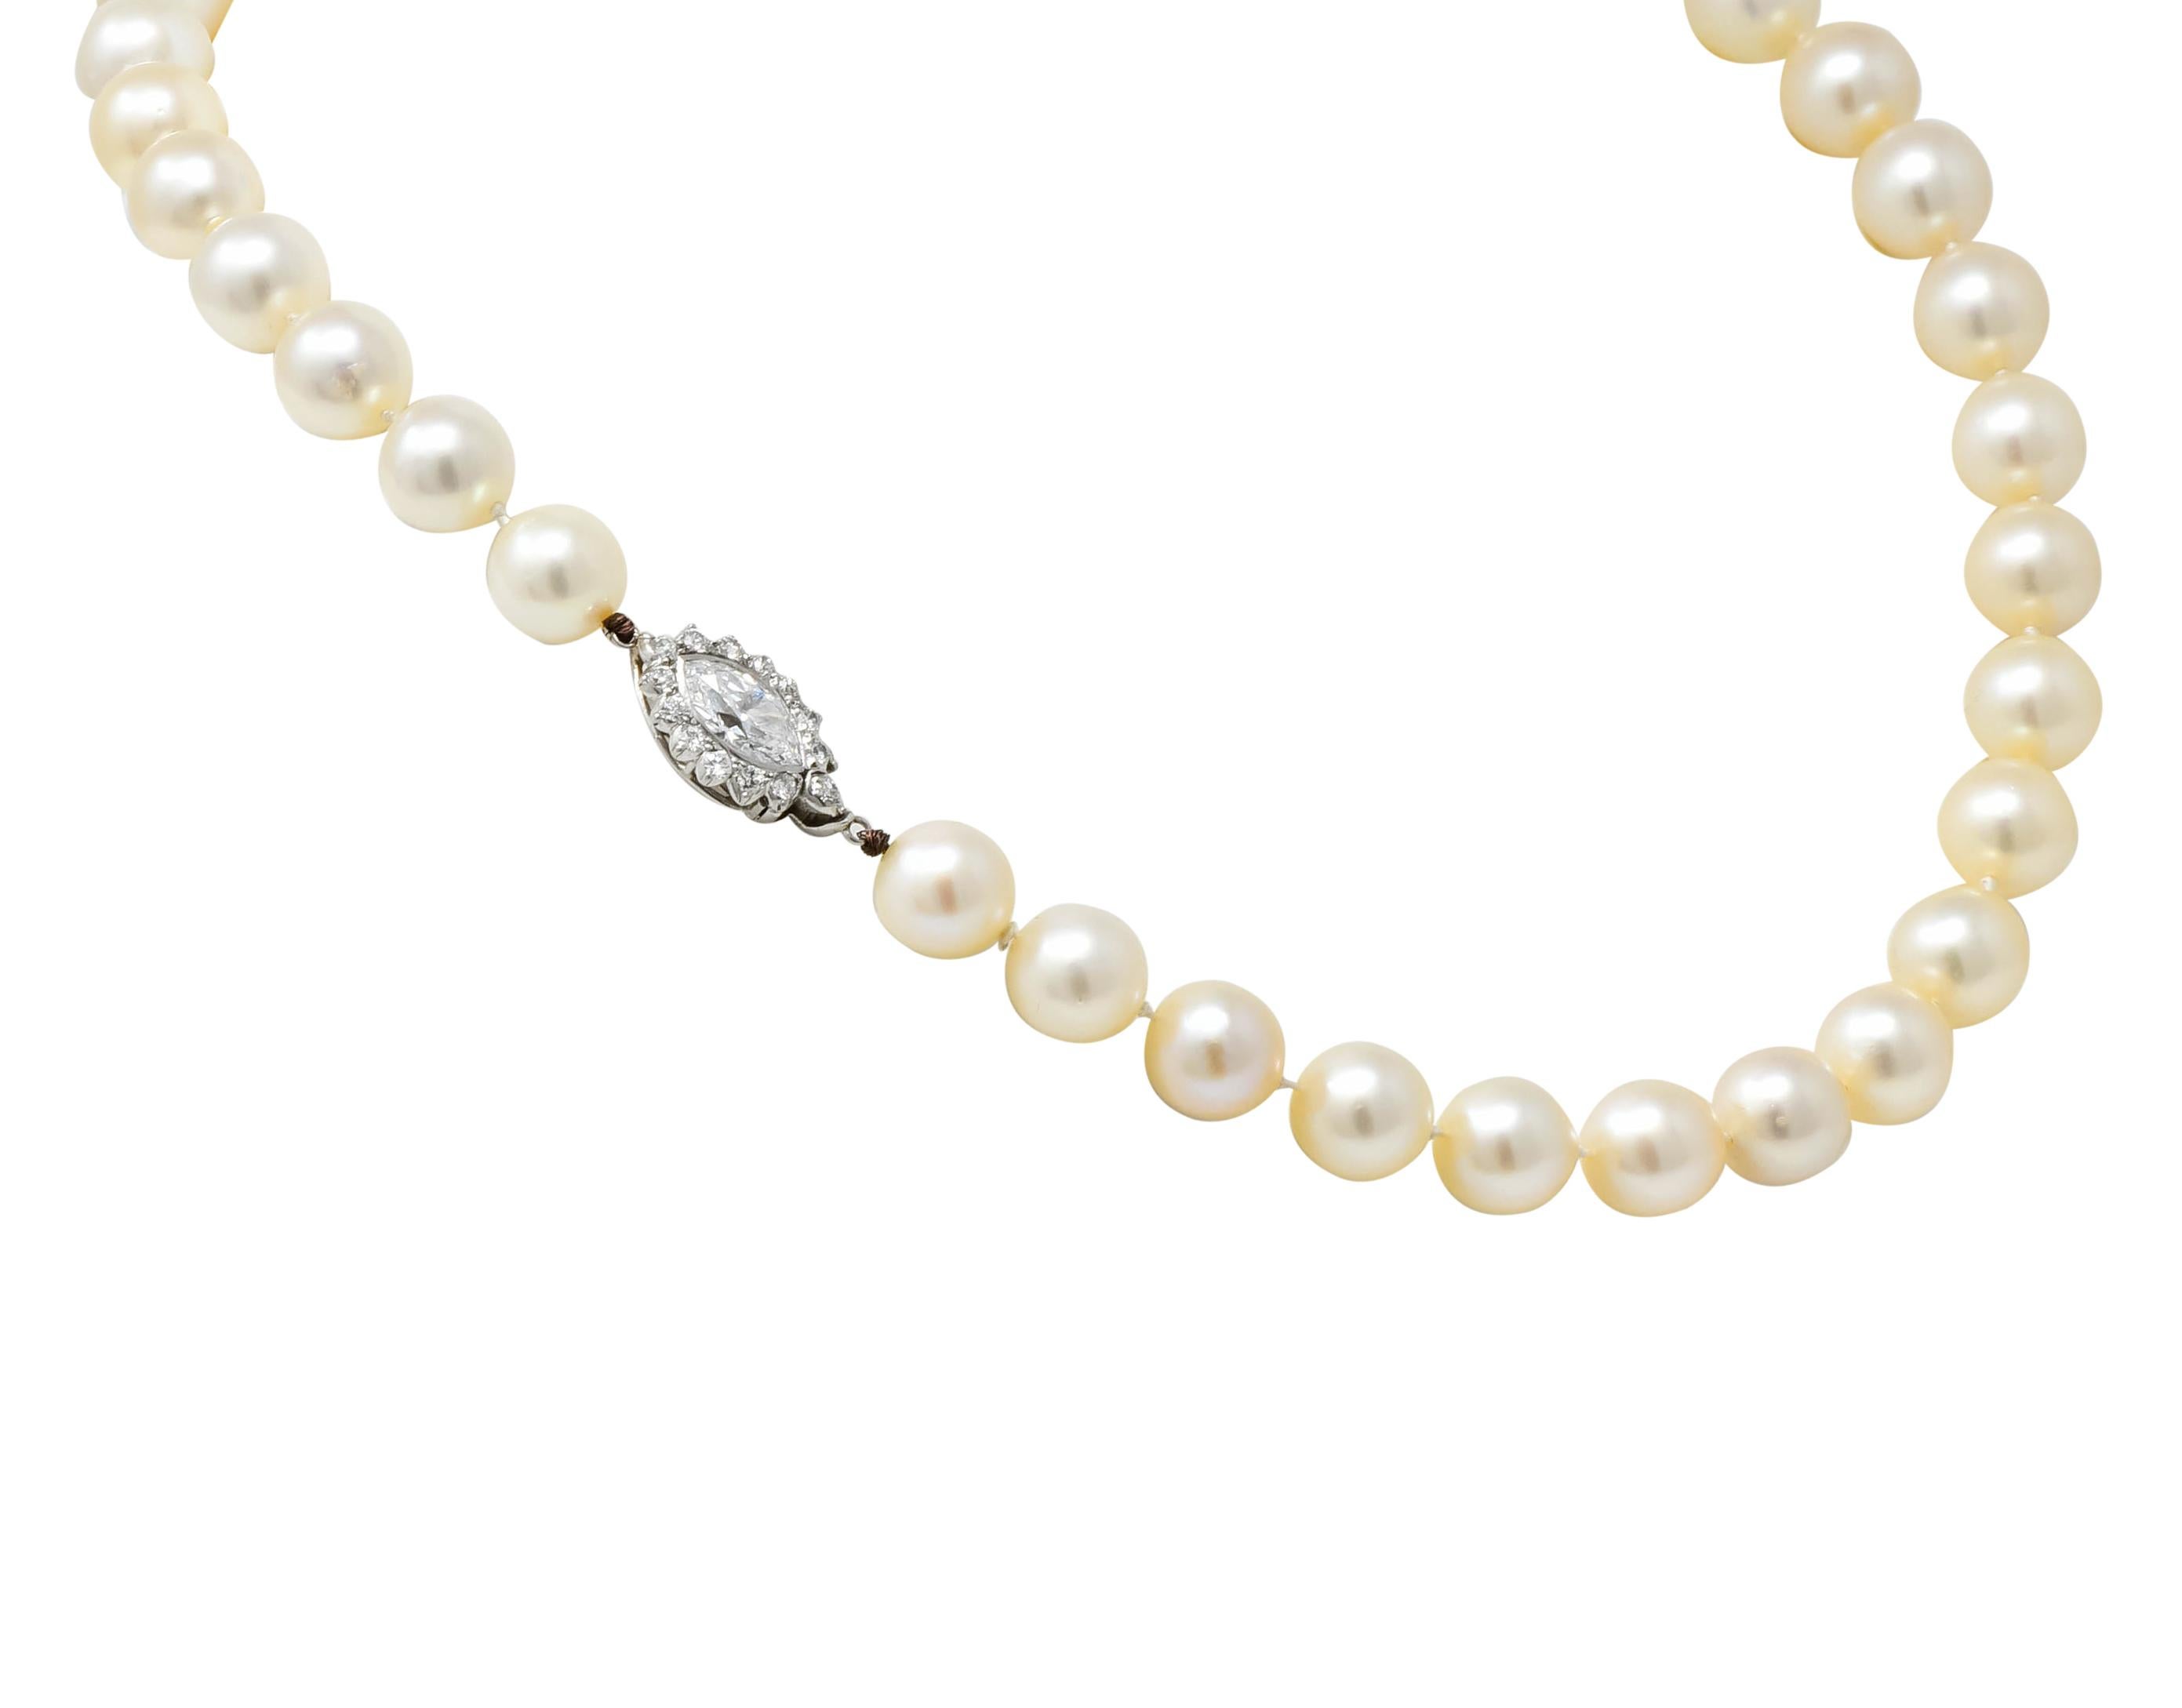 Contemporary Cartier 1.31 Carat Diamond Cultured Pearl Platinum Knotted Strand Necklace GIA